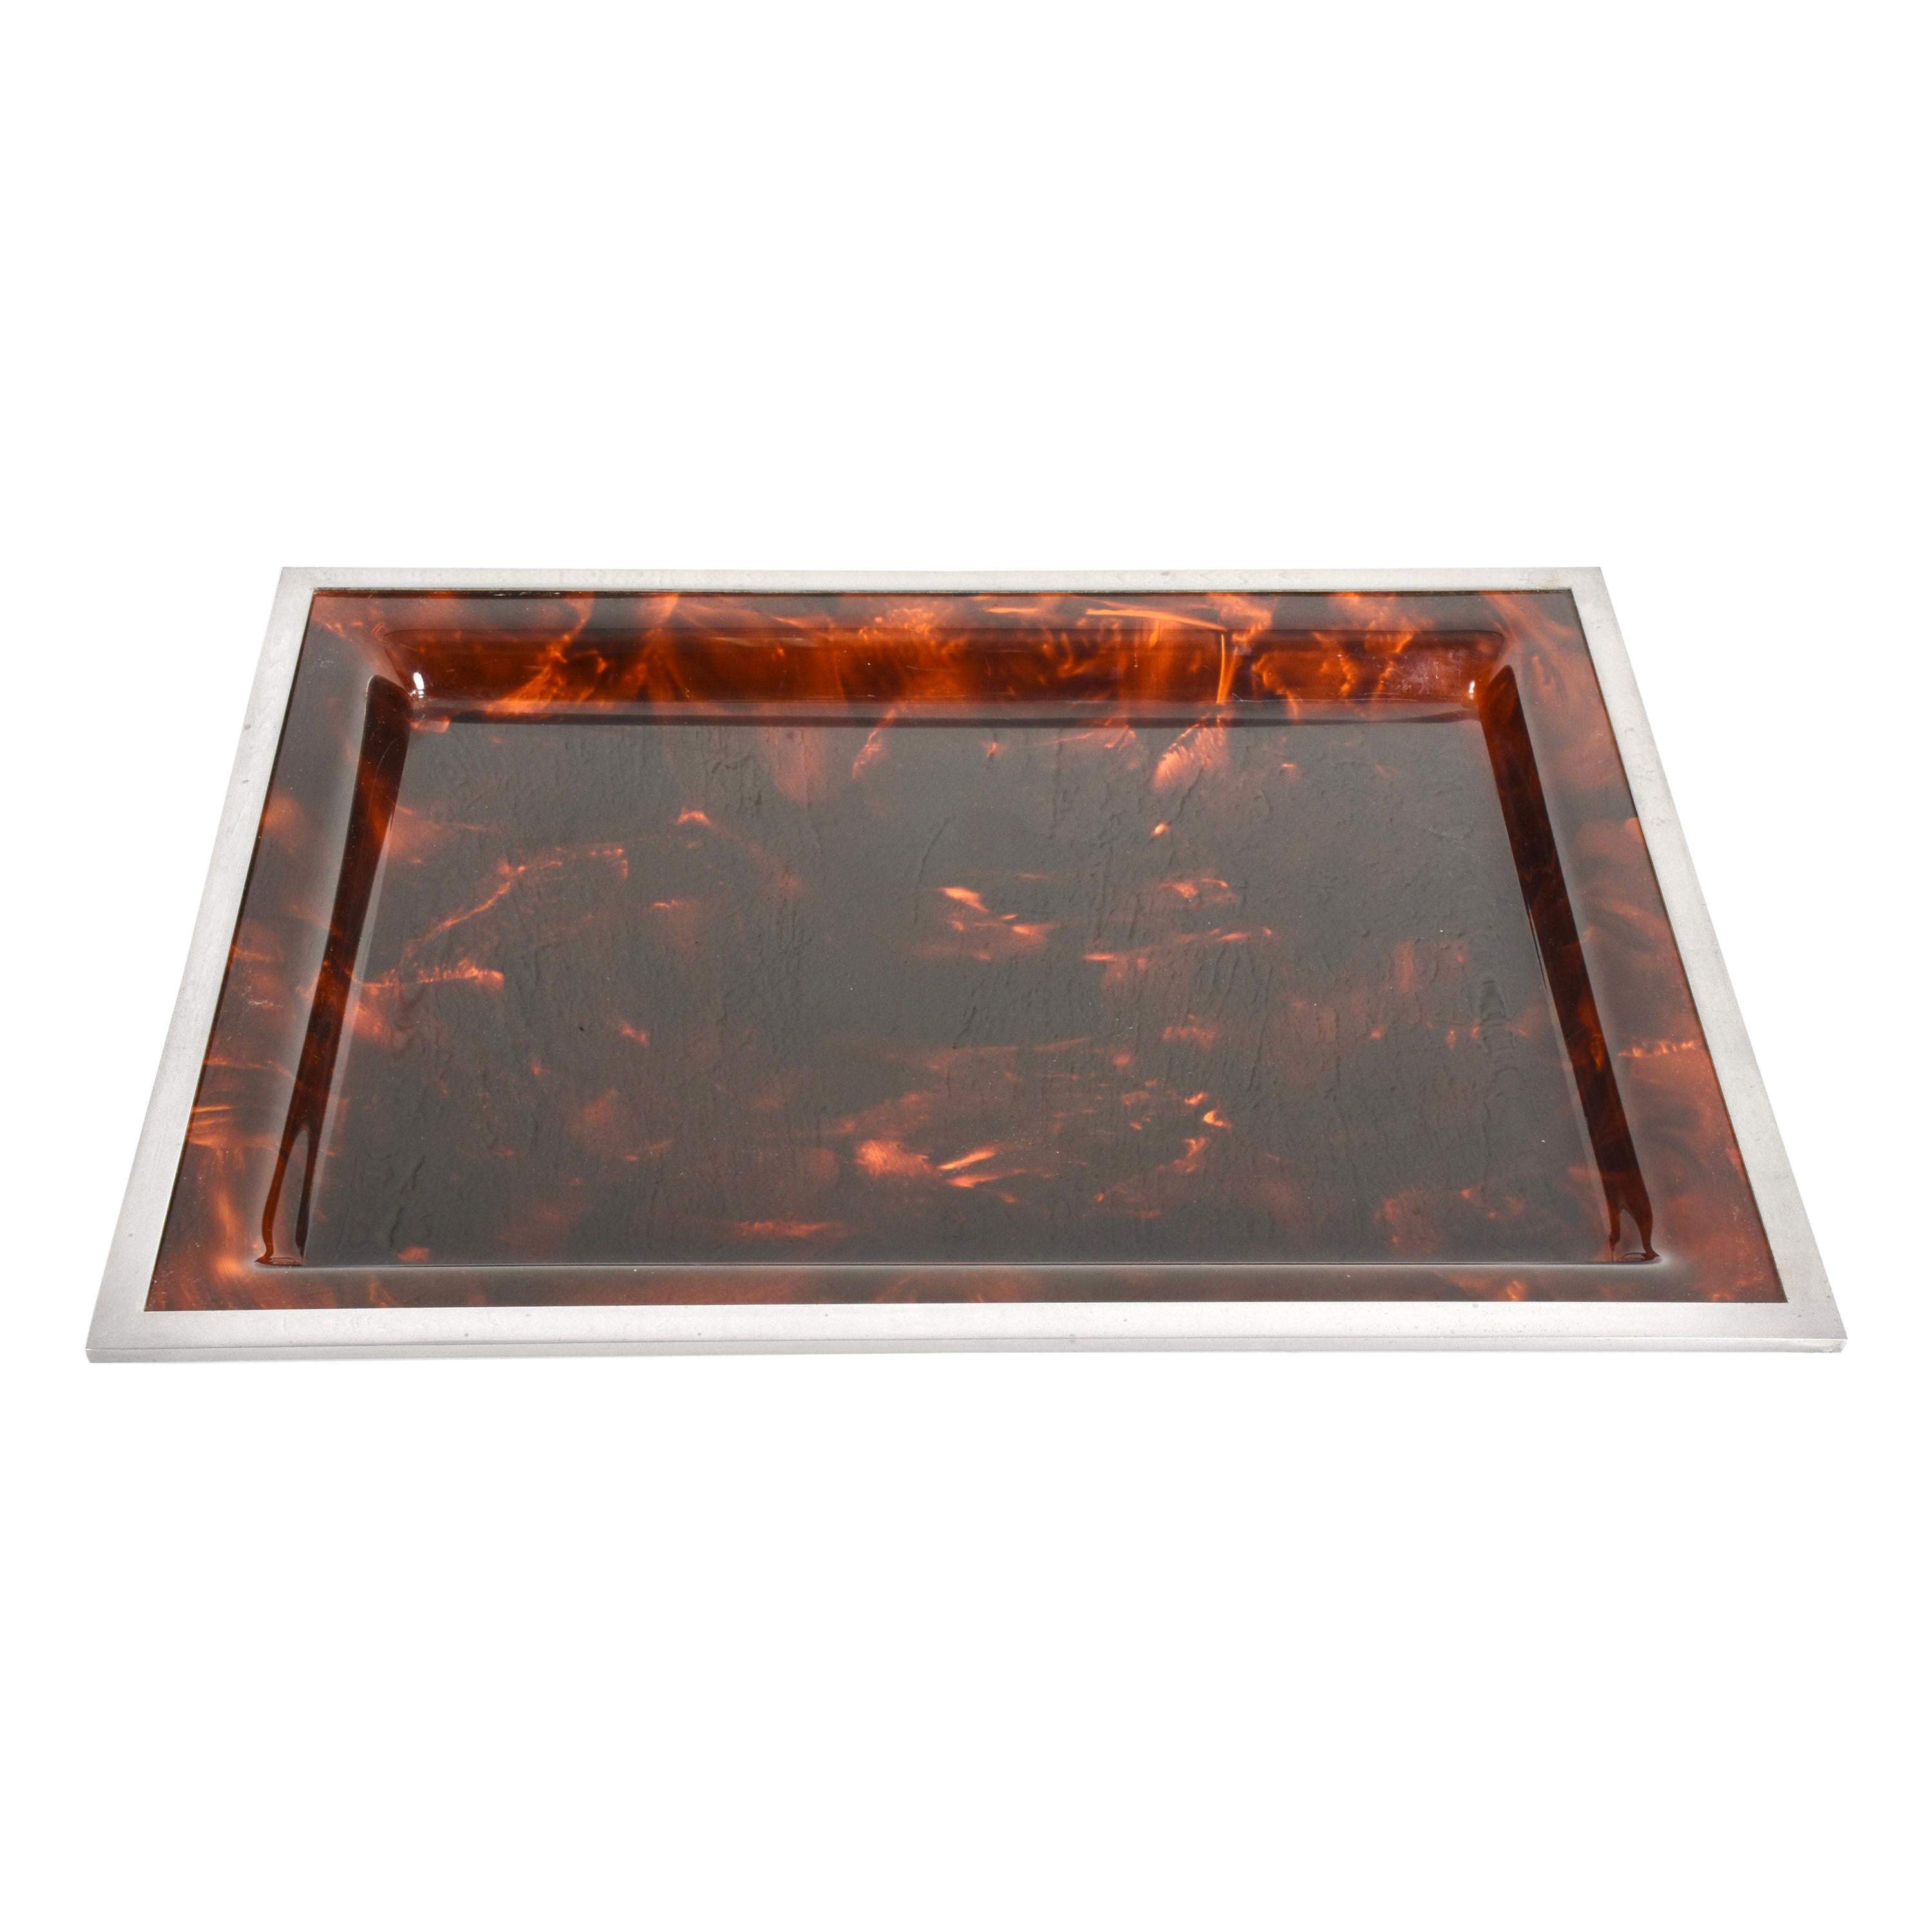 Midcentury Tortoiseshell and Lucite Italian Serving Tray after Willy Rizzo 1970s